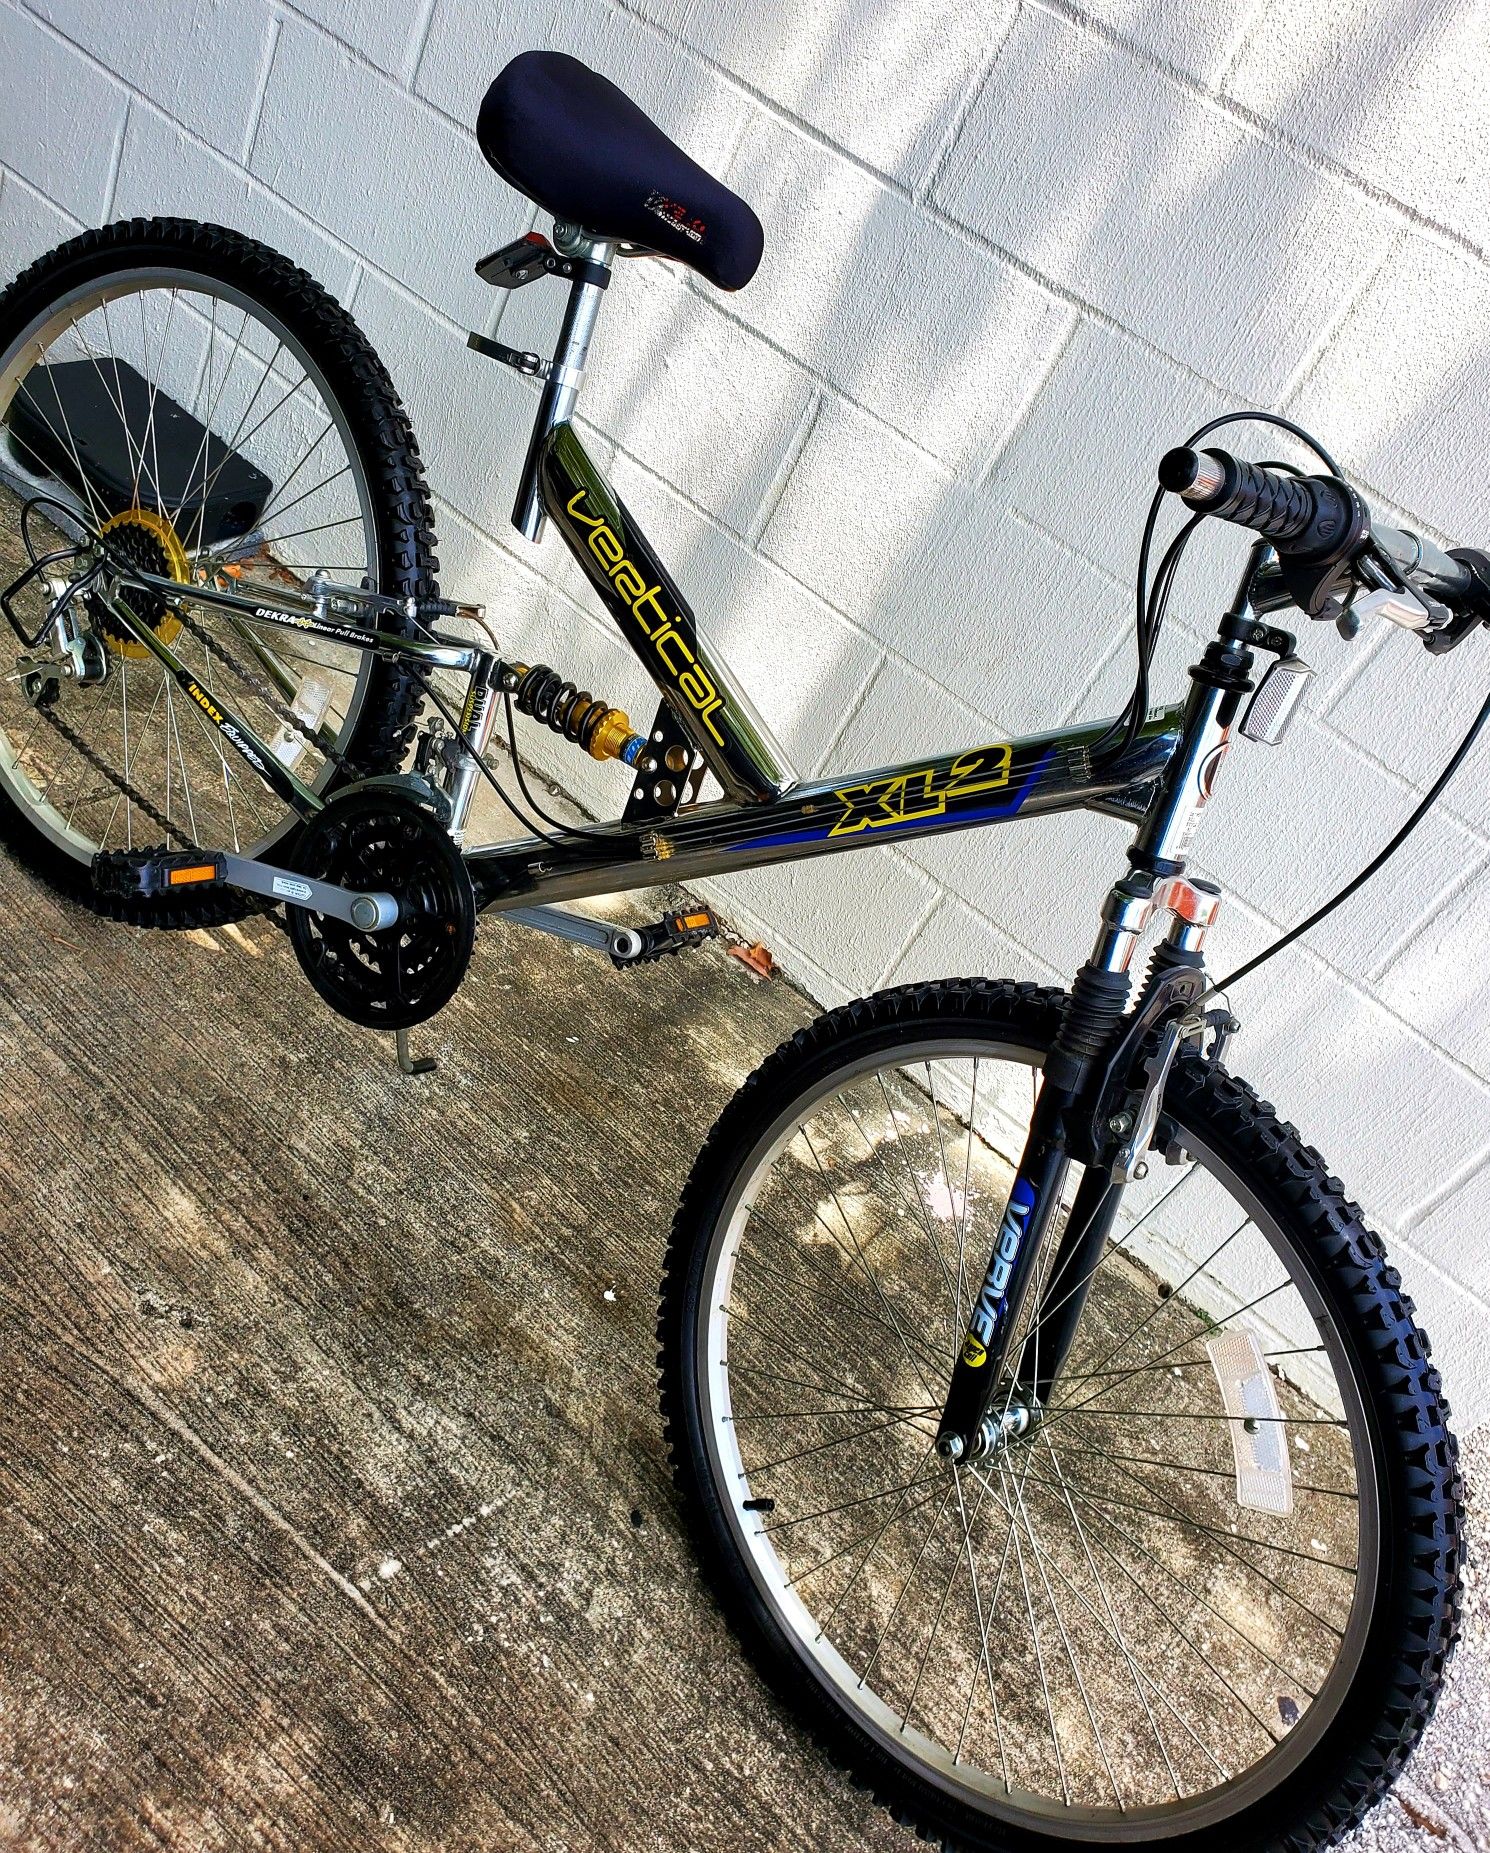 26" tire size . 20" inches frame VERTICAL XL2 MOUNTAIN FULL SUSPENSION BIKE 21-SPEED GREAT CONDITIONS READY TO RIDE.